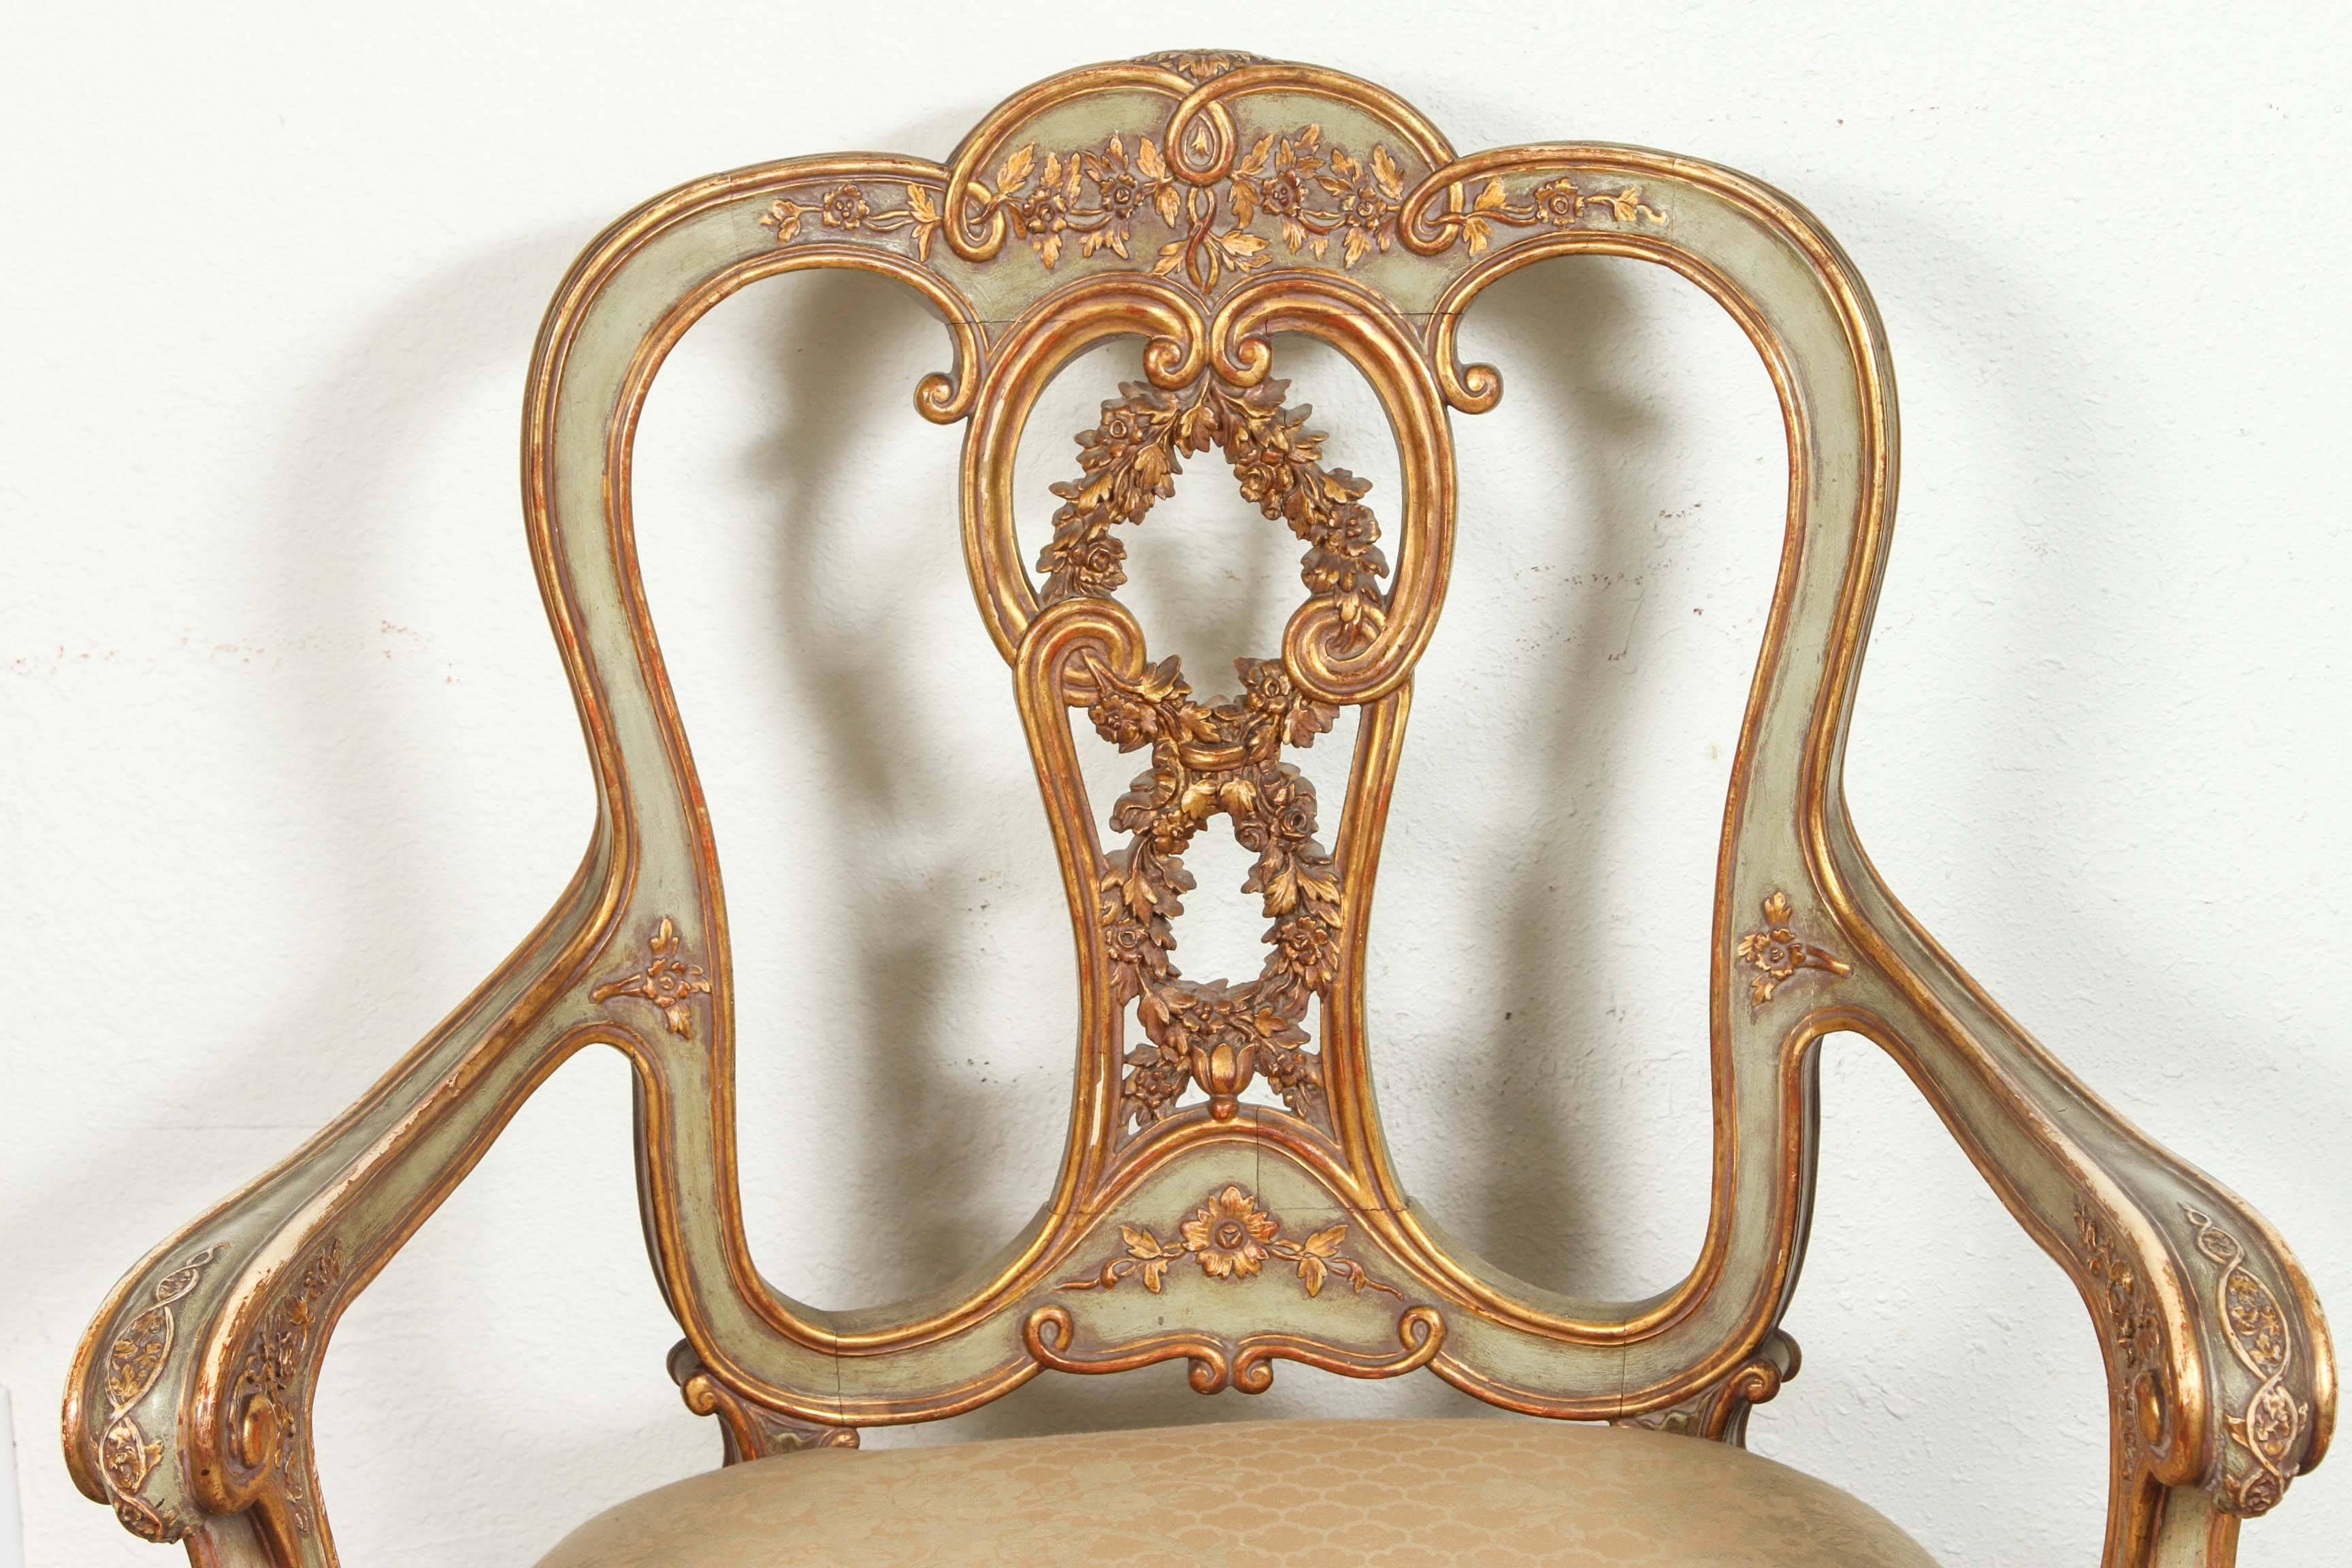 Two, hand-carved and painted, parcel-gilt, Venetian armchairs with pierced splat featuring carvings of fruit laden wreaths.